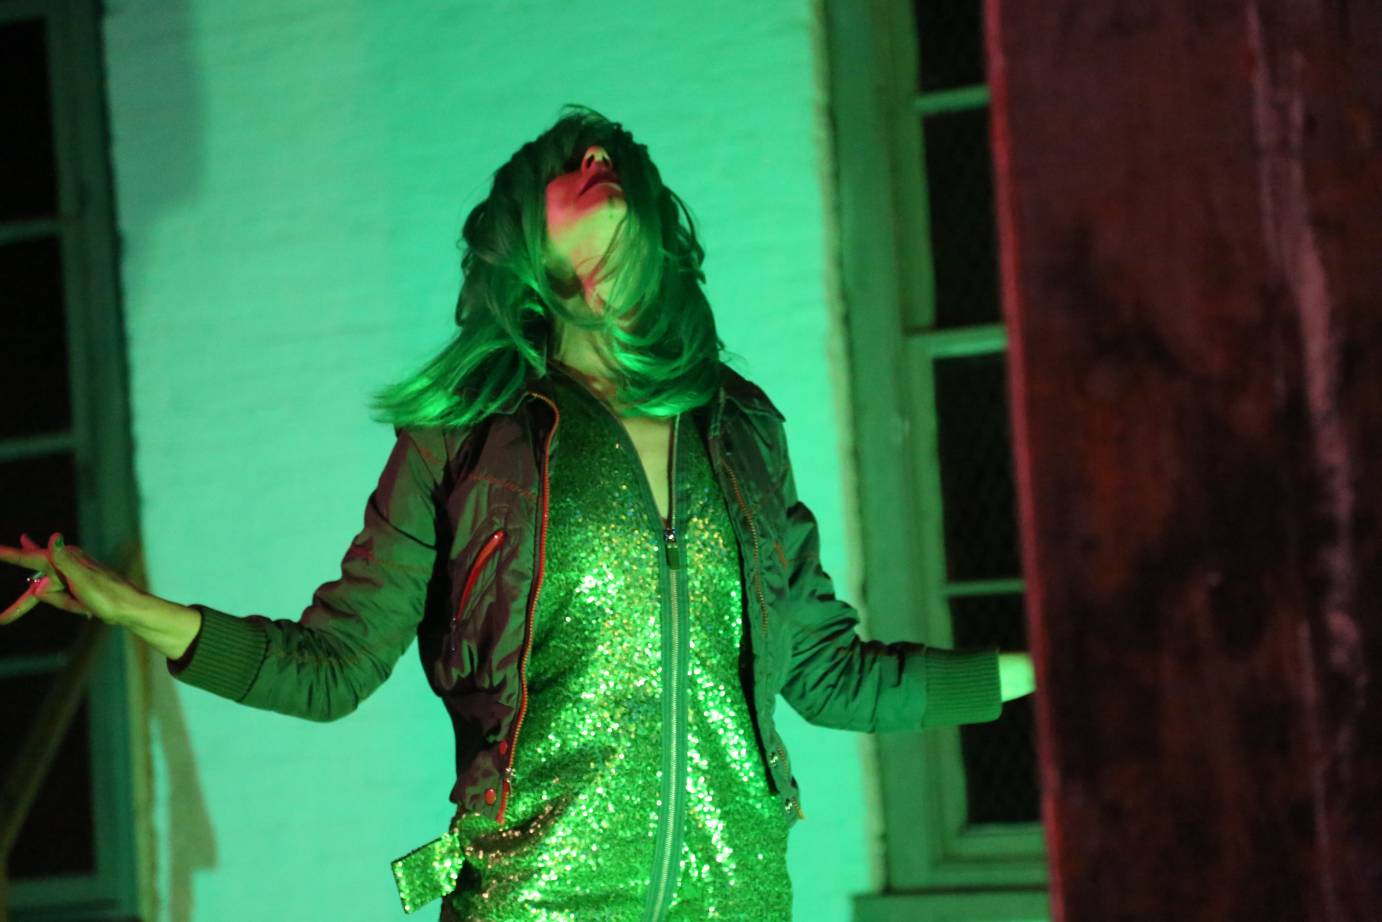 A woman in a green wig throws her head back